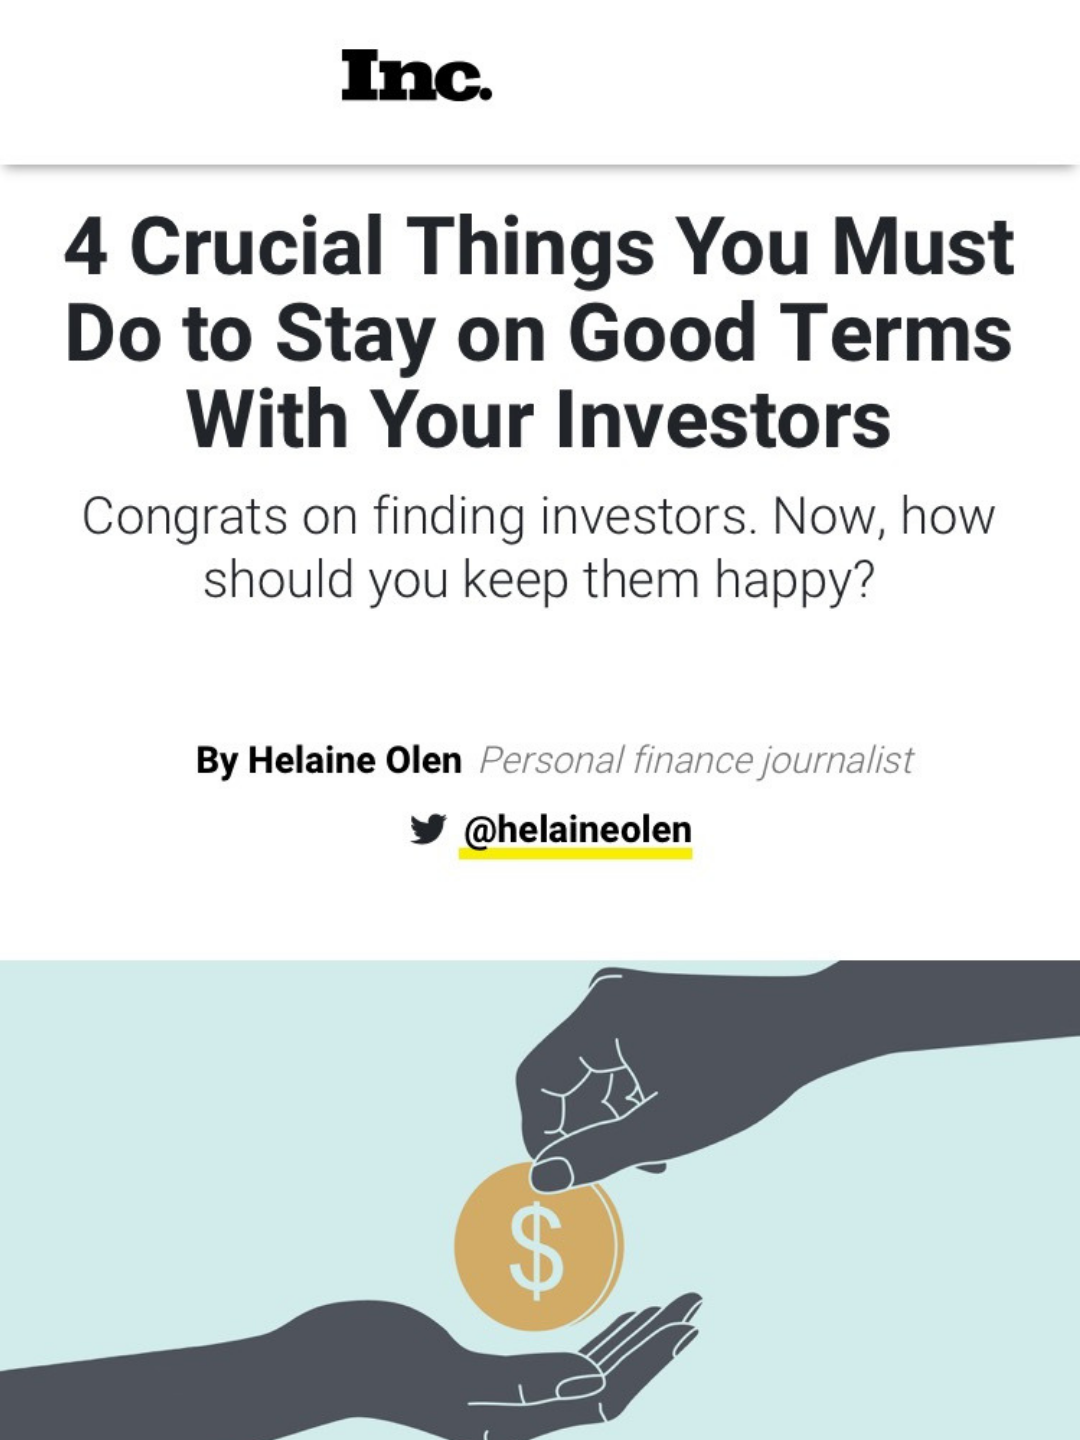 4 Crucial Things You Must Do to Stay on Good Terms With Your Investors